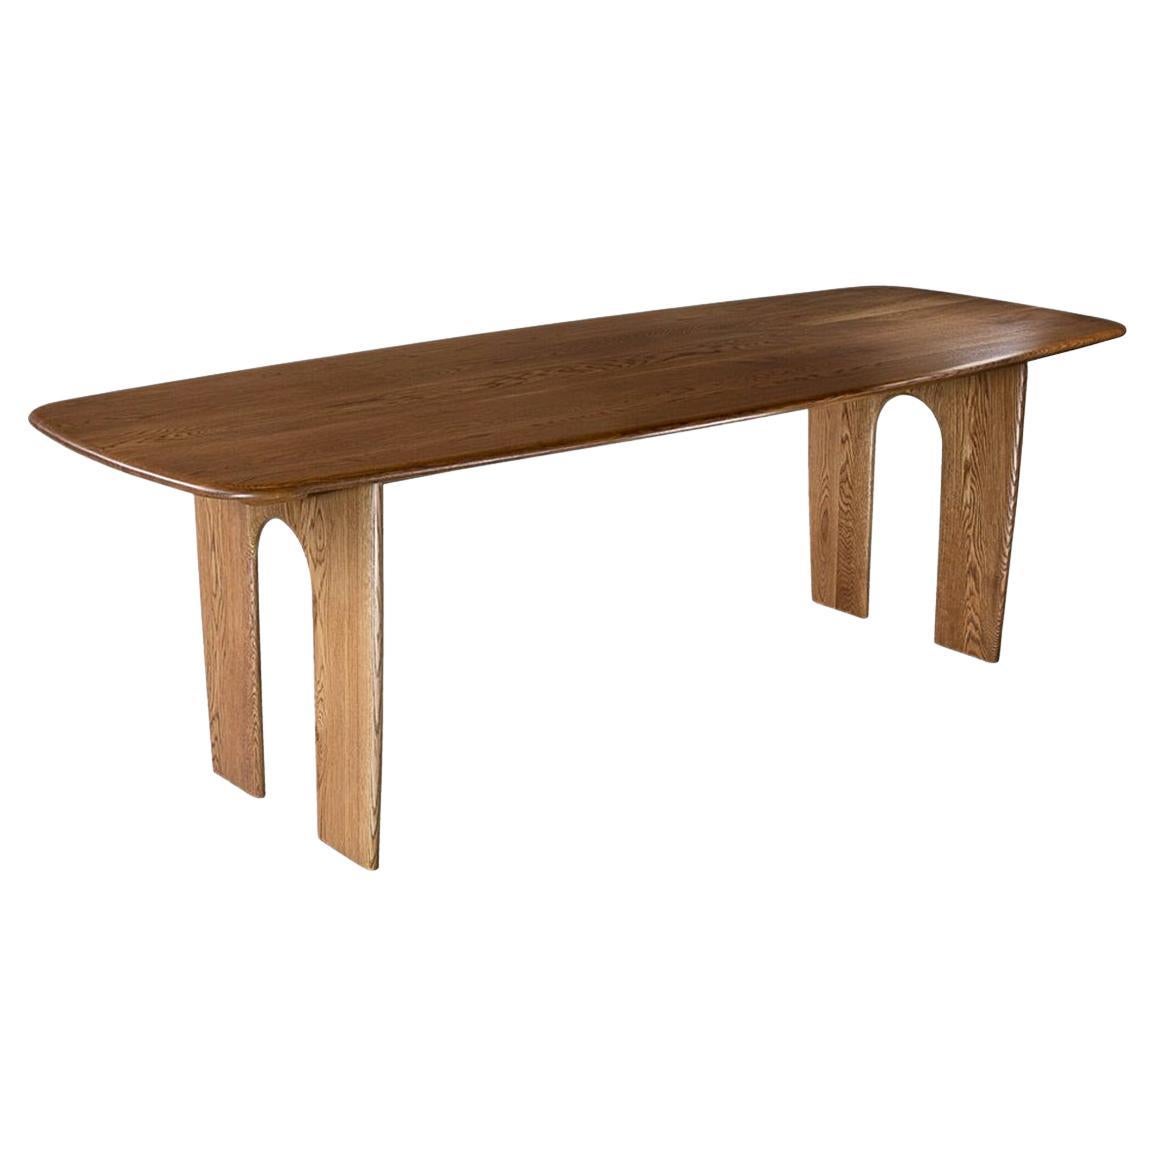 Coble Dining Table - Wooden Oak Veneer - seats 10 For Sale